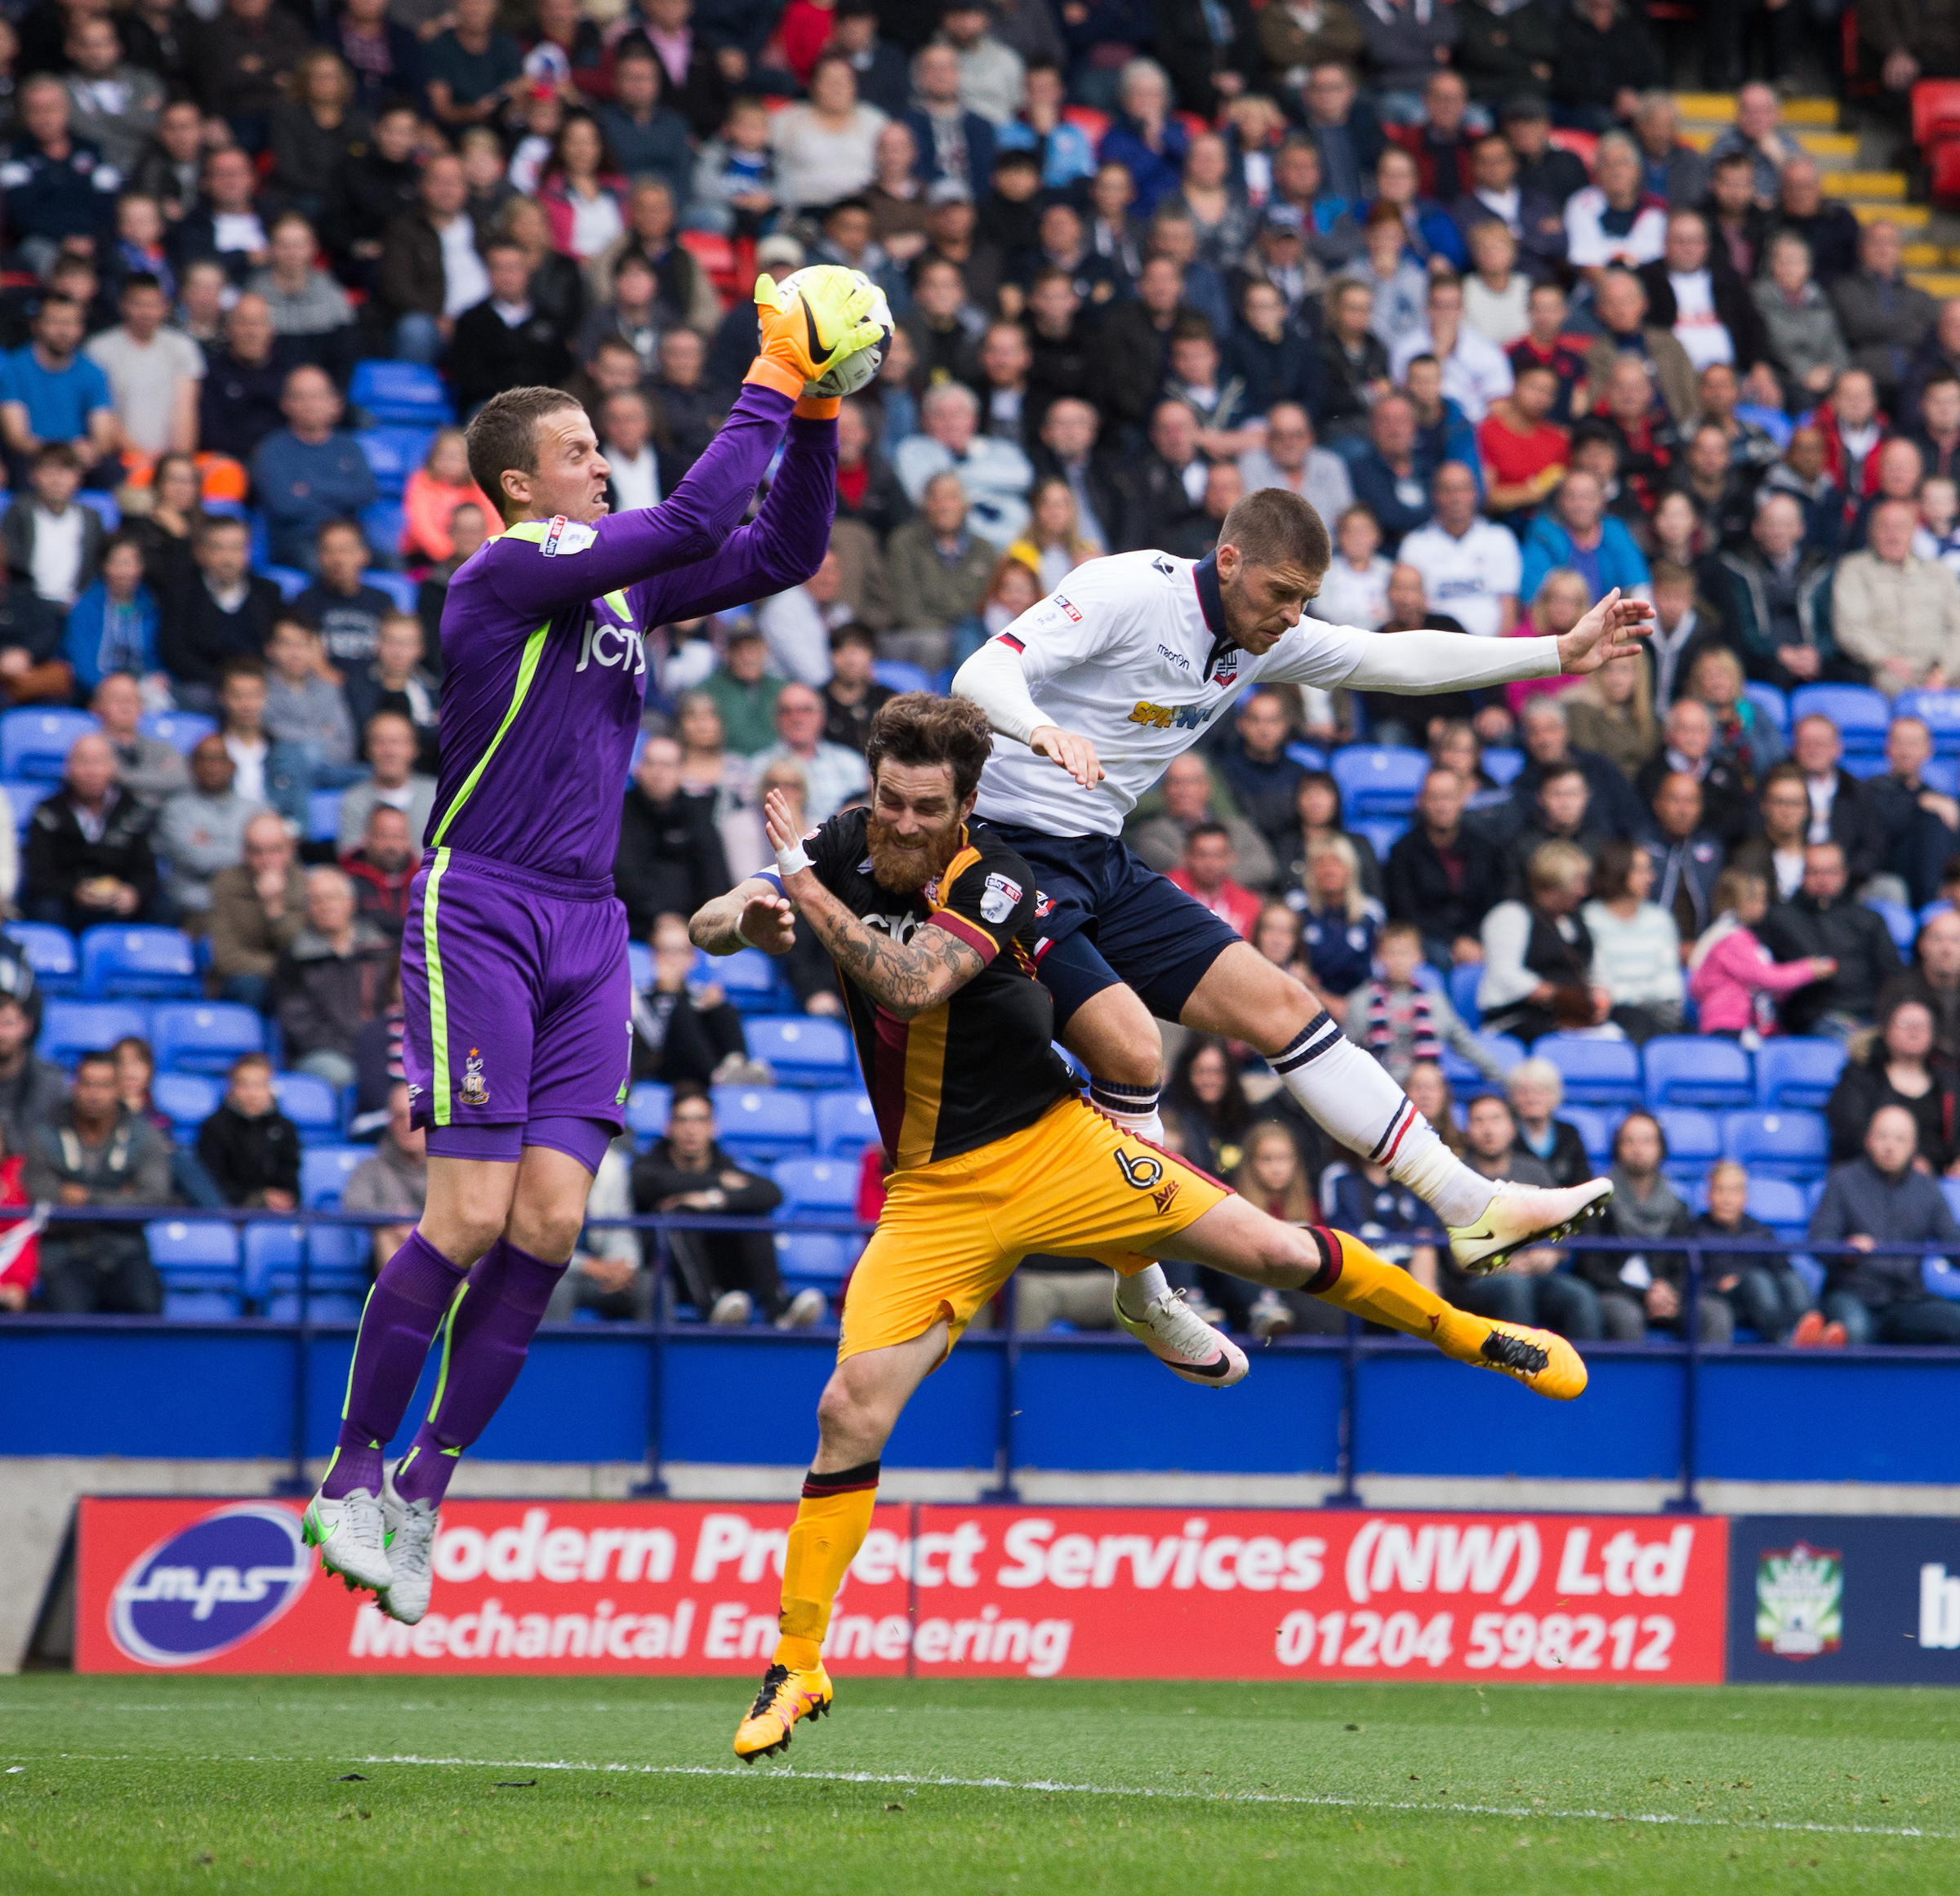 Bradford City goalkeeper Colin Doyle wary of Bolton Wanderers' physical threat - The Bolton News